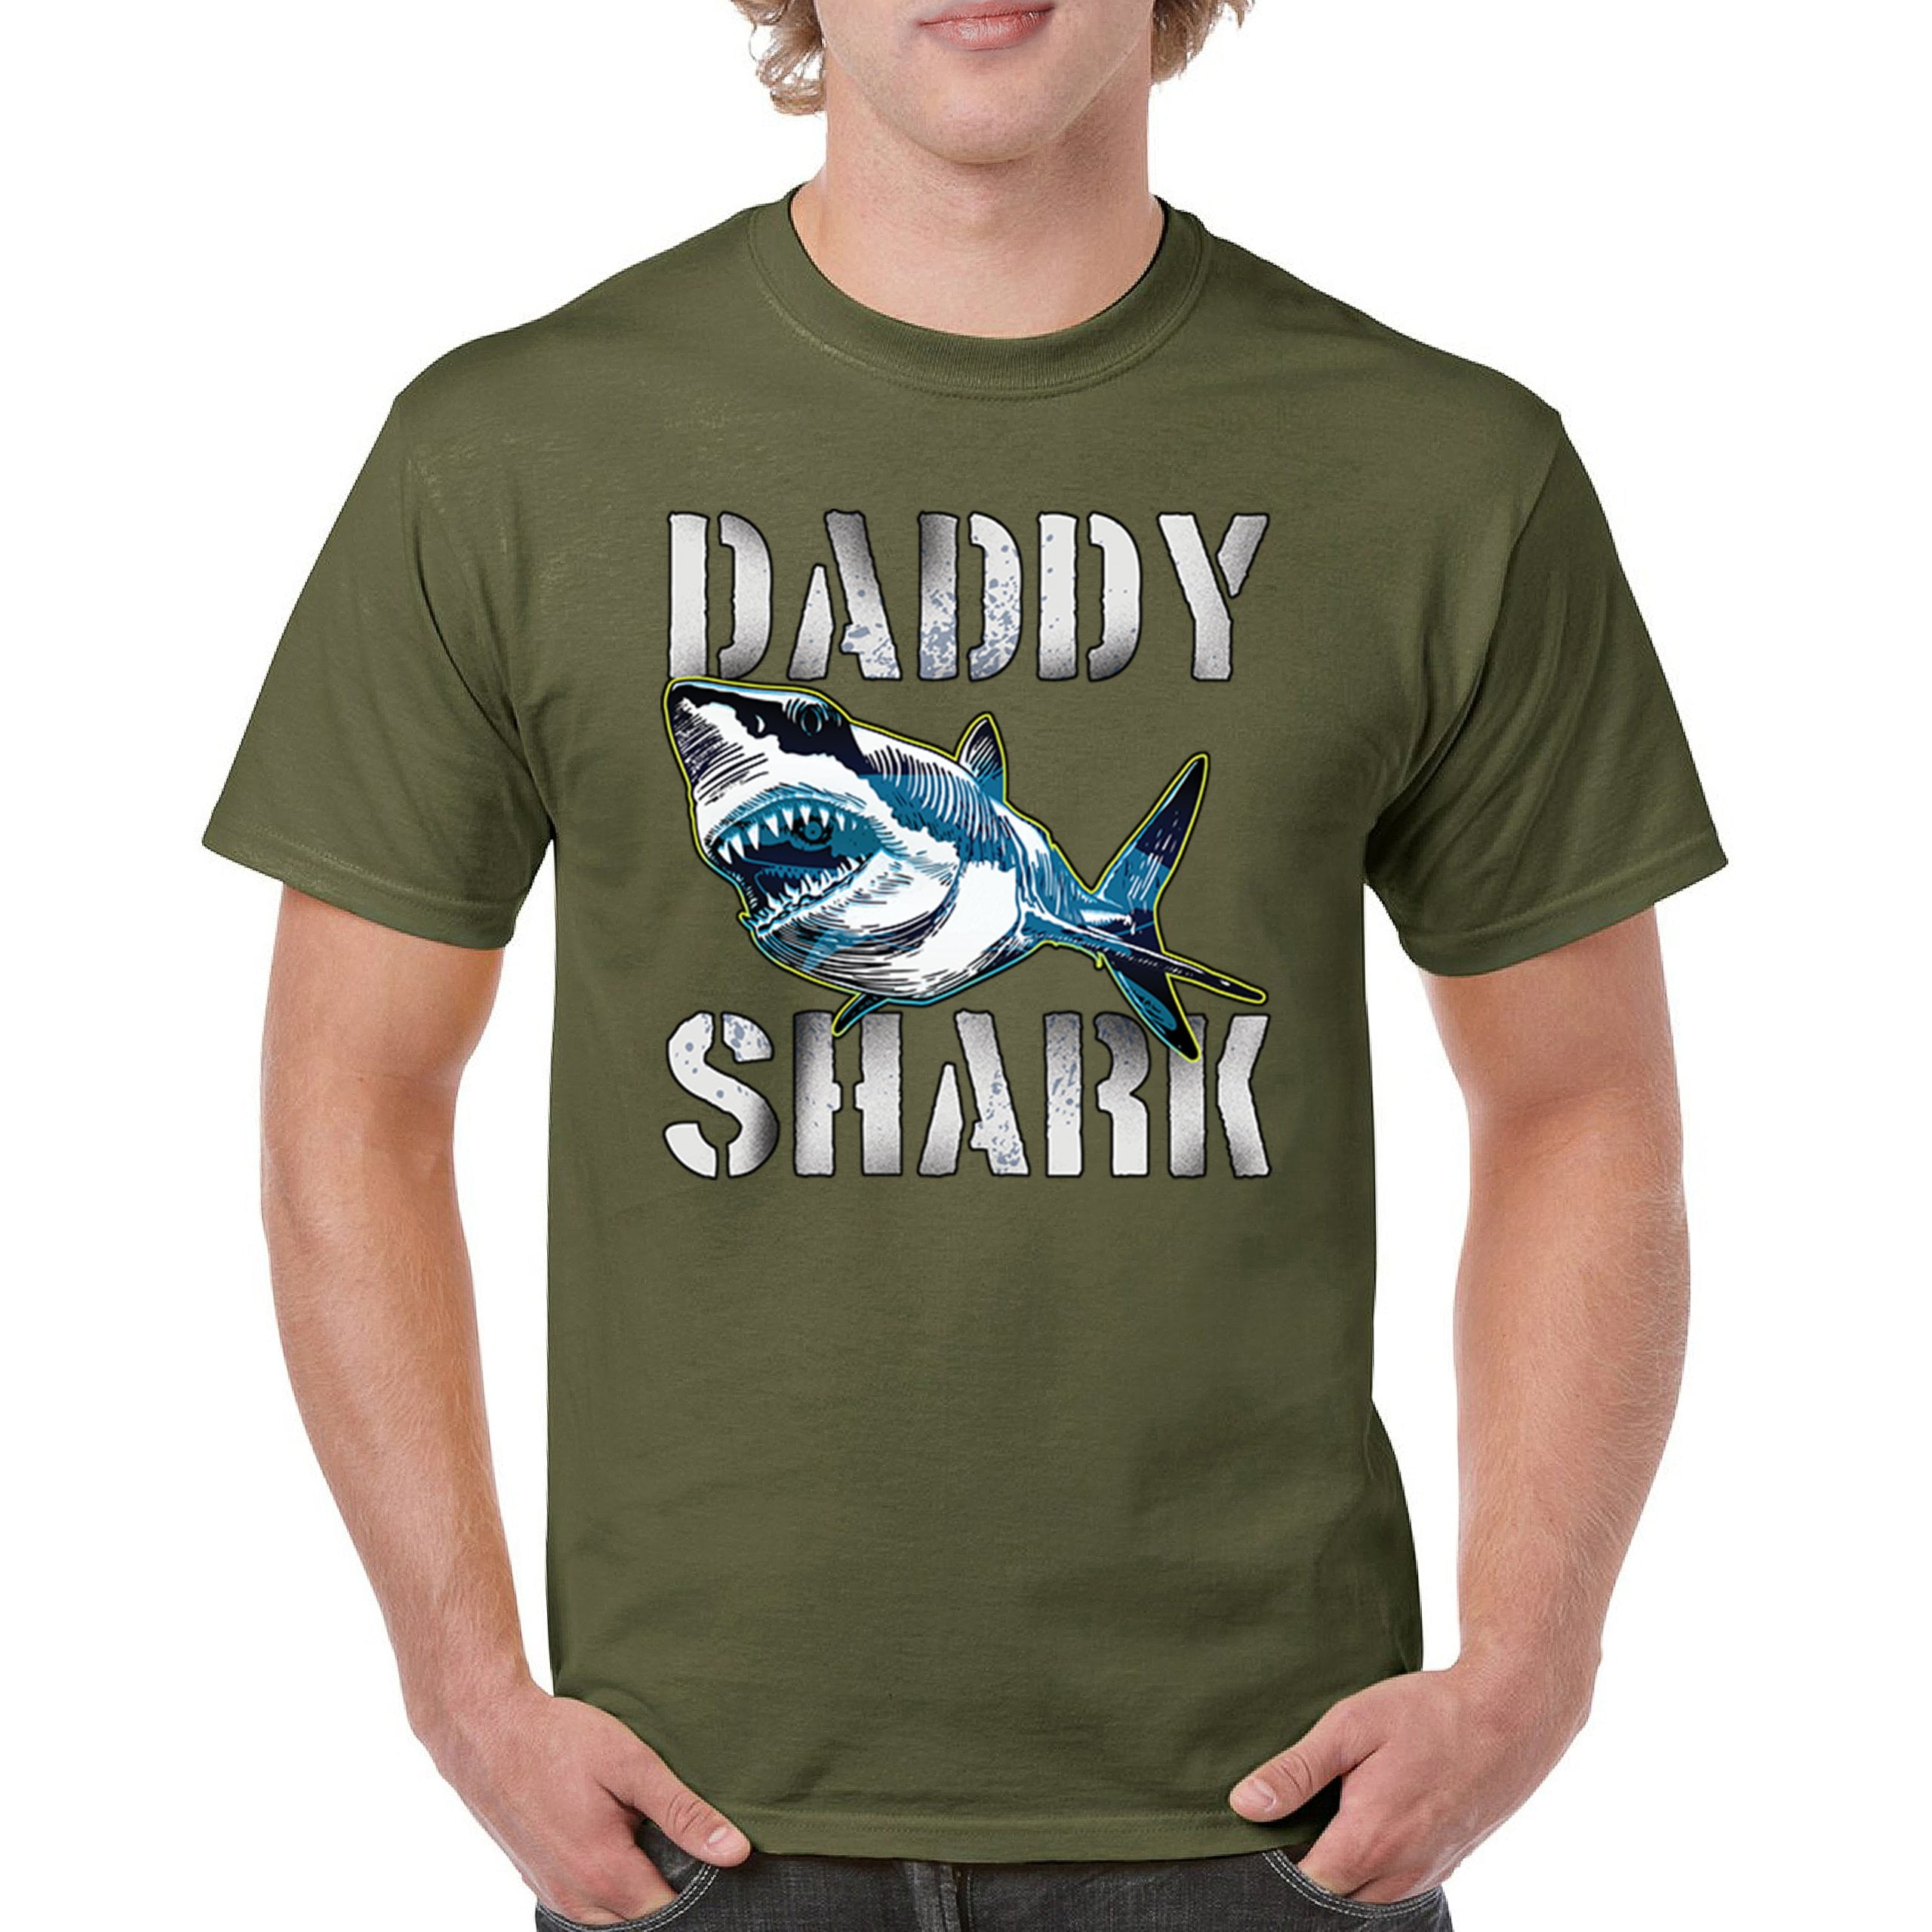 Tee Hunt Daddy Shark Funny Father's Day T-Shirt Funny Military Green, X-Large - Walmart.com